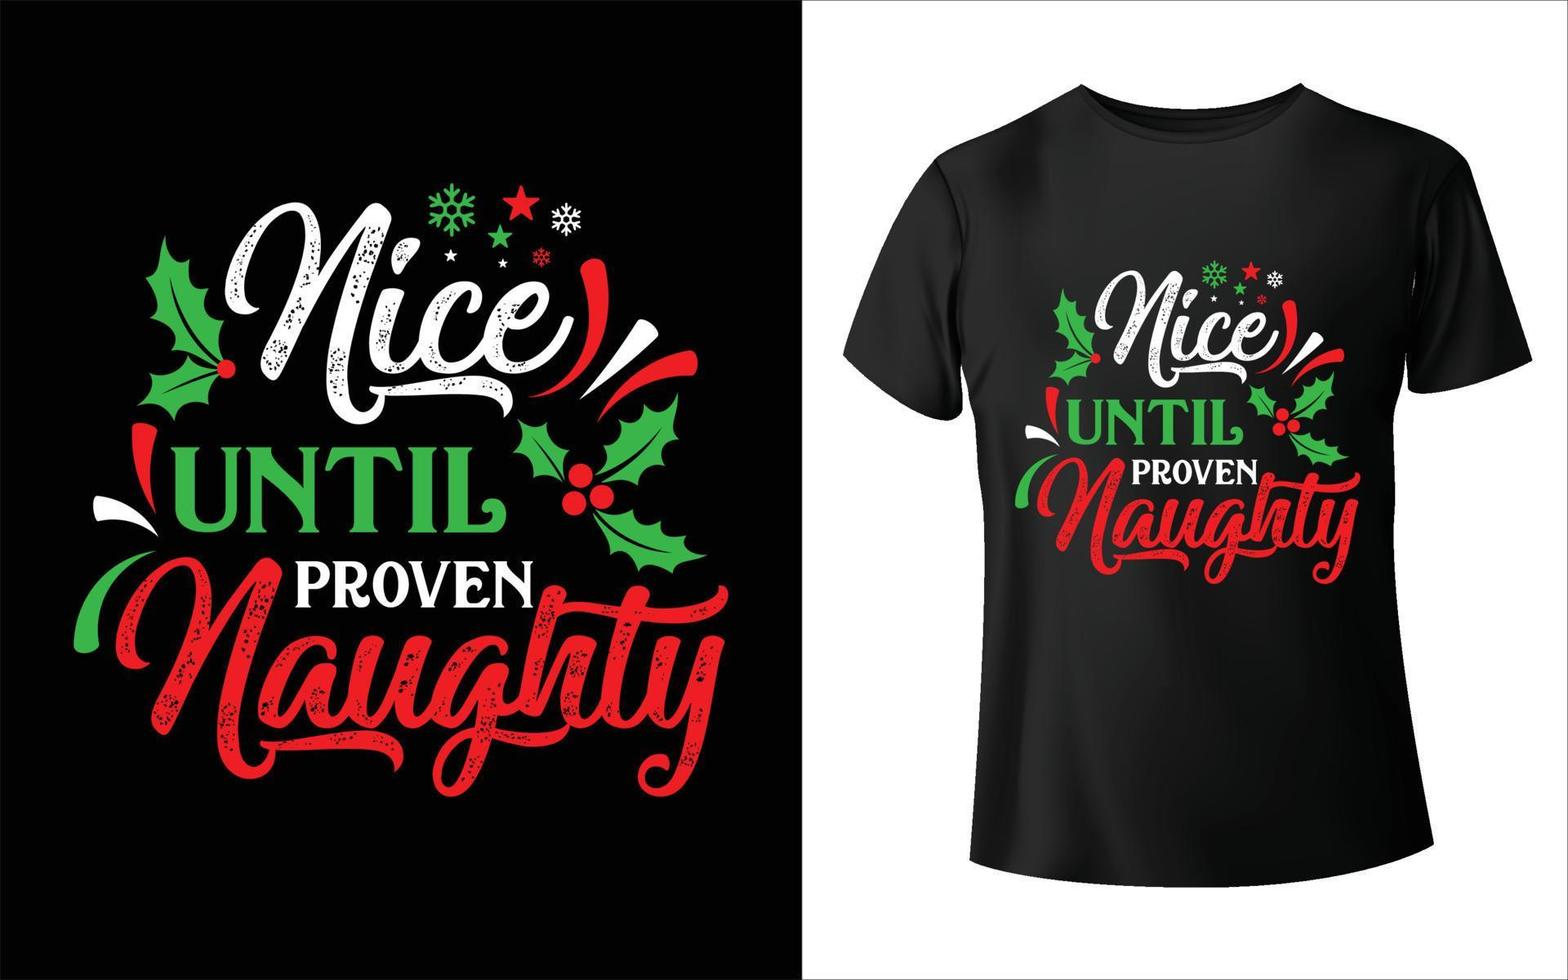 Nice until proven naughty t-shirt design - Vector graphic, typographic poster, vintage, label, badge, logo, icon or t-shirt